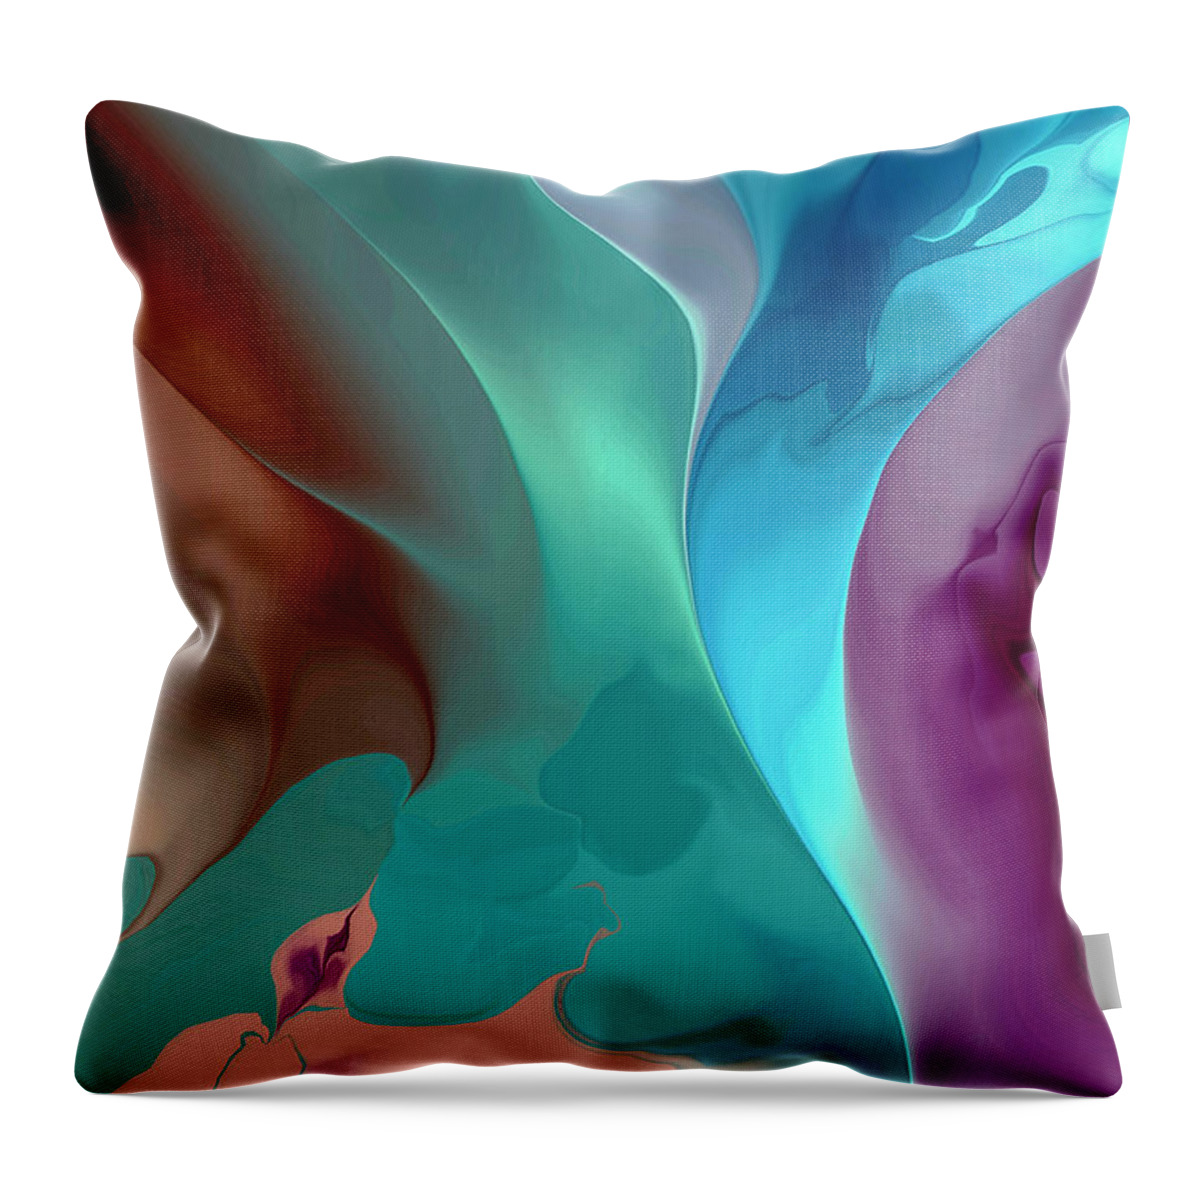 Expressive Feeling Throw Pillow featuring the digital art Expressive Feeling by Leo Symon